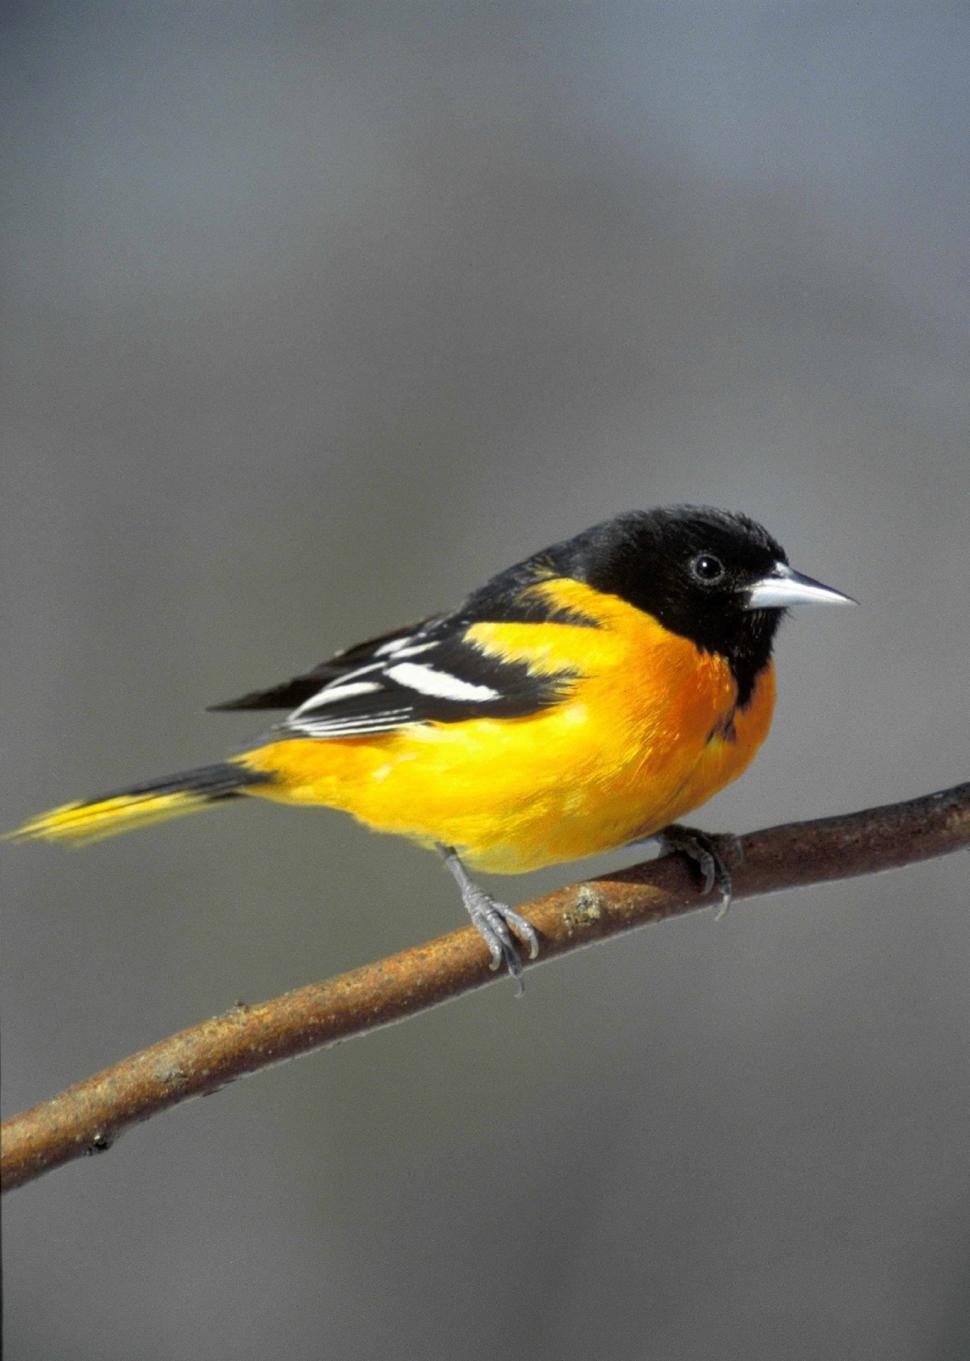 Free Image of Yellow and Black Bird Perched on Branch 